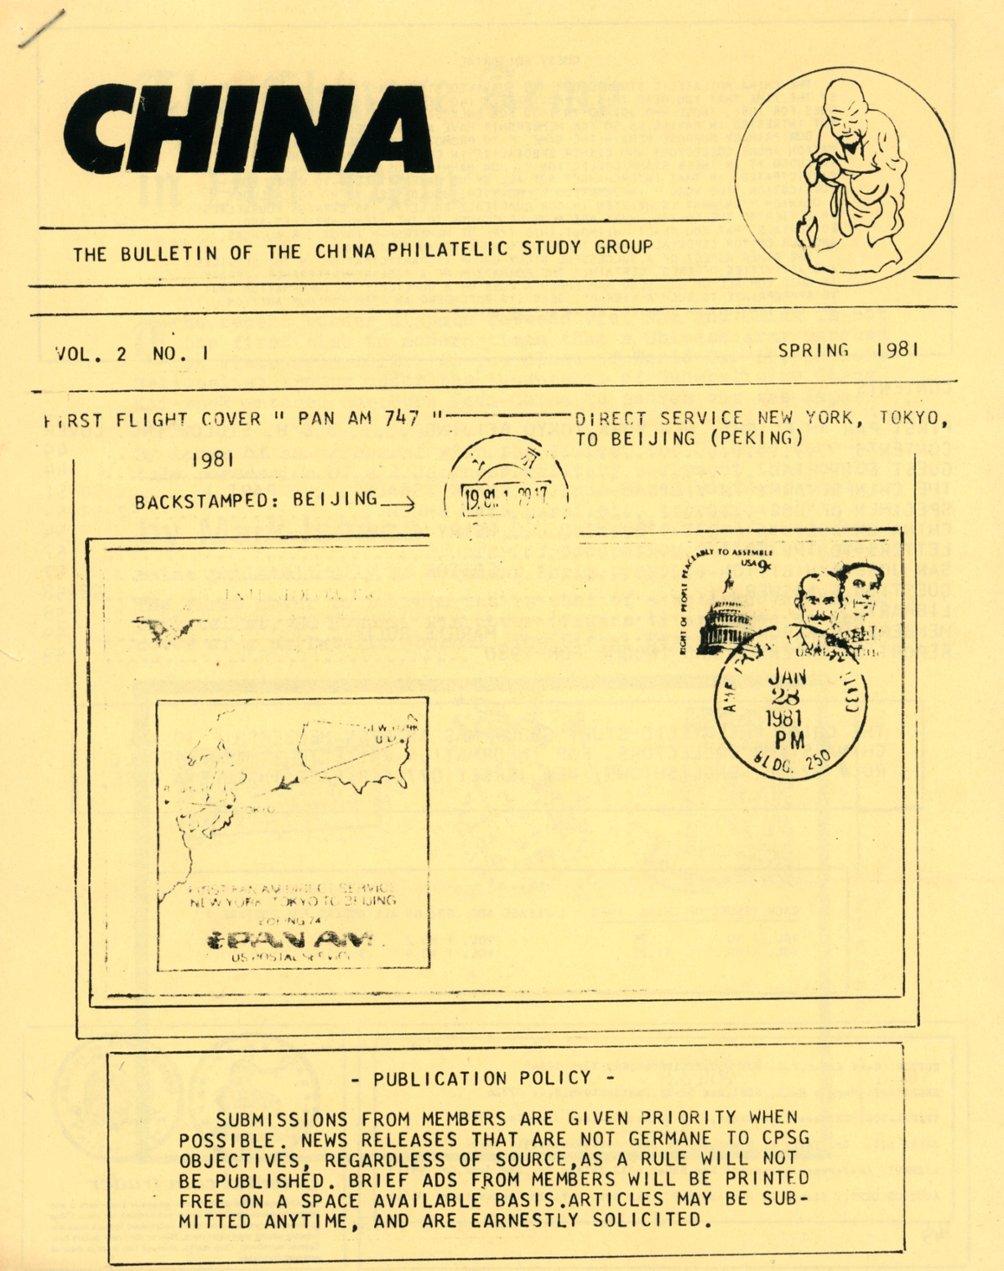 China, The Bulletin of the China Study Group, Millbrook, NY, Vol. 2, No. 1 (Spring 1981), in good condition (2 oz)